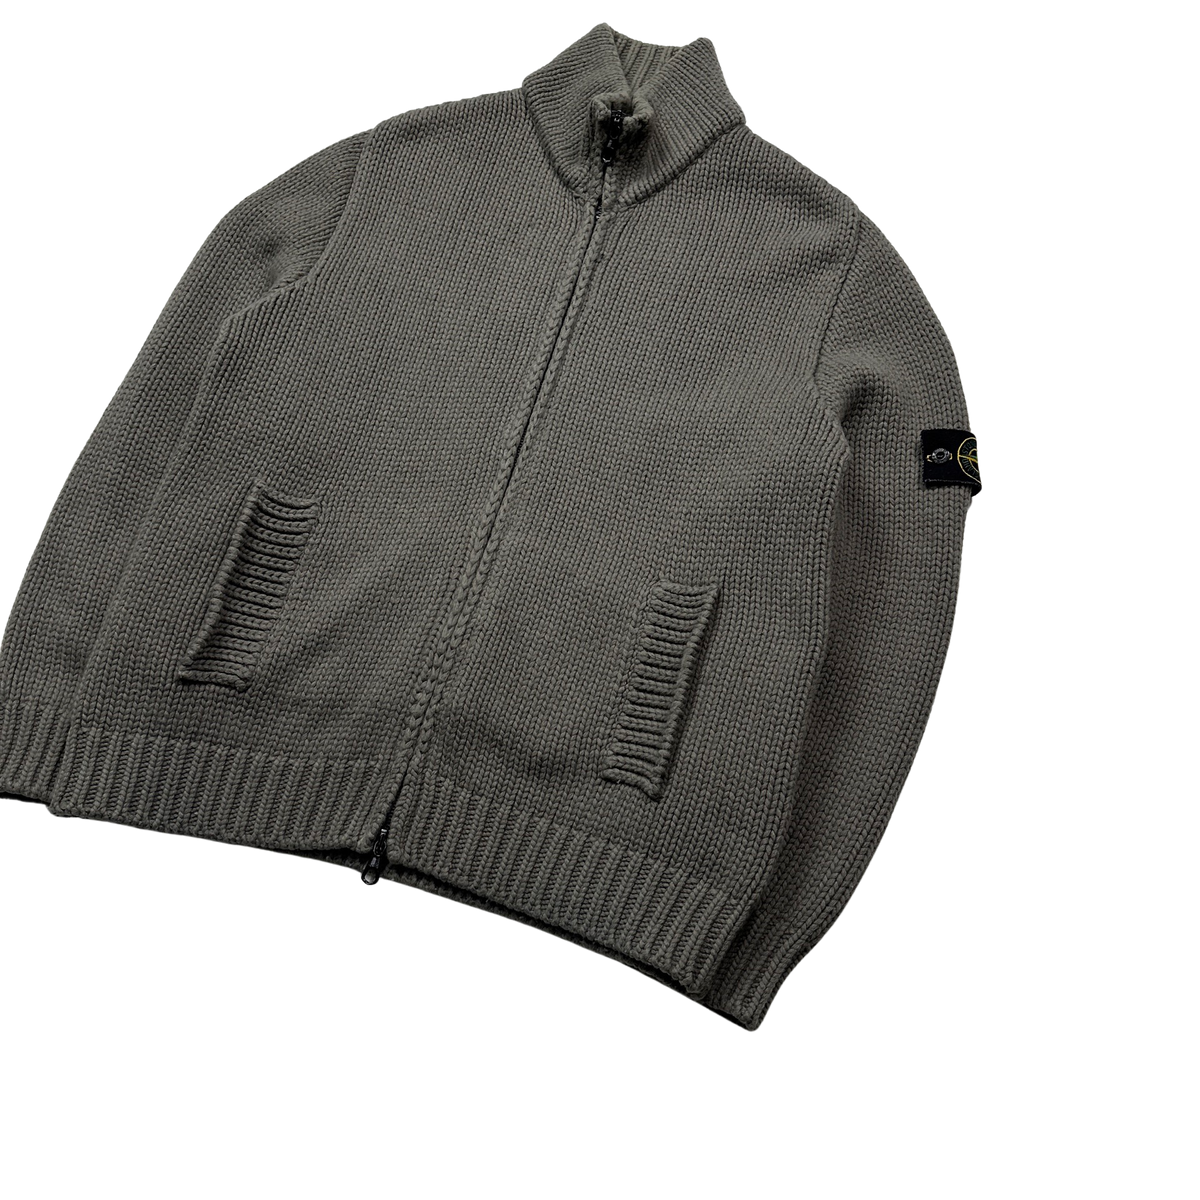 Stone Island 2003 Heavyweight Knitted Zip Up Jumper - Large ...